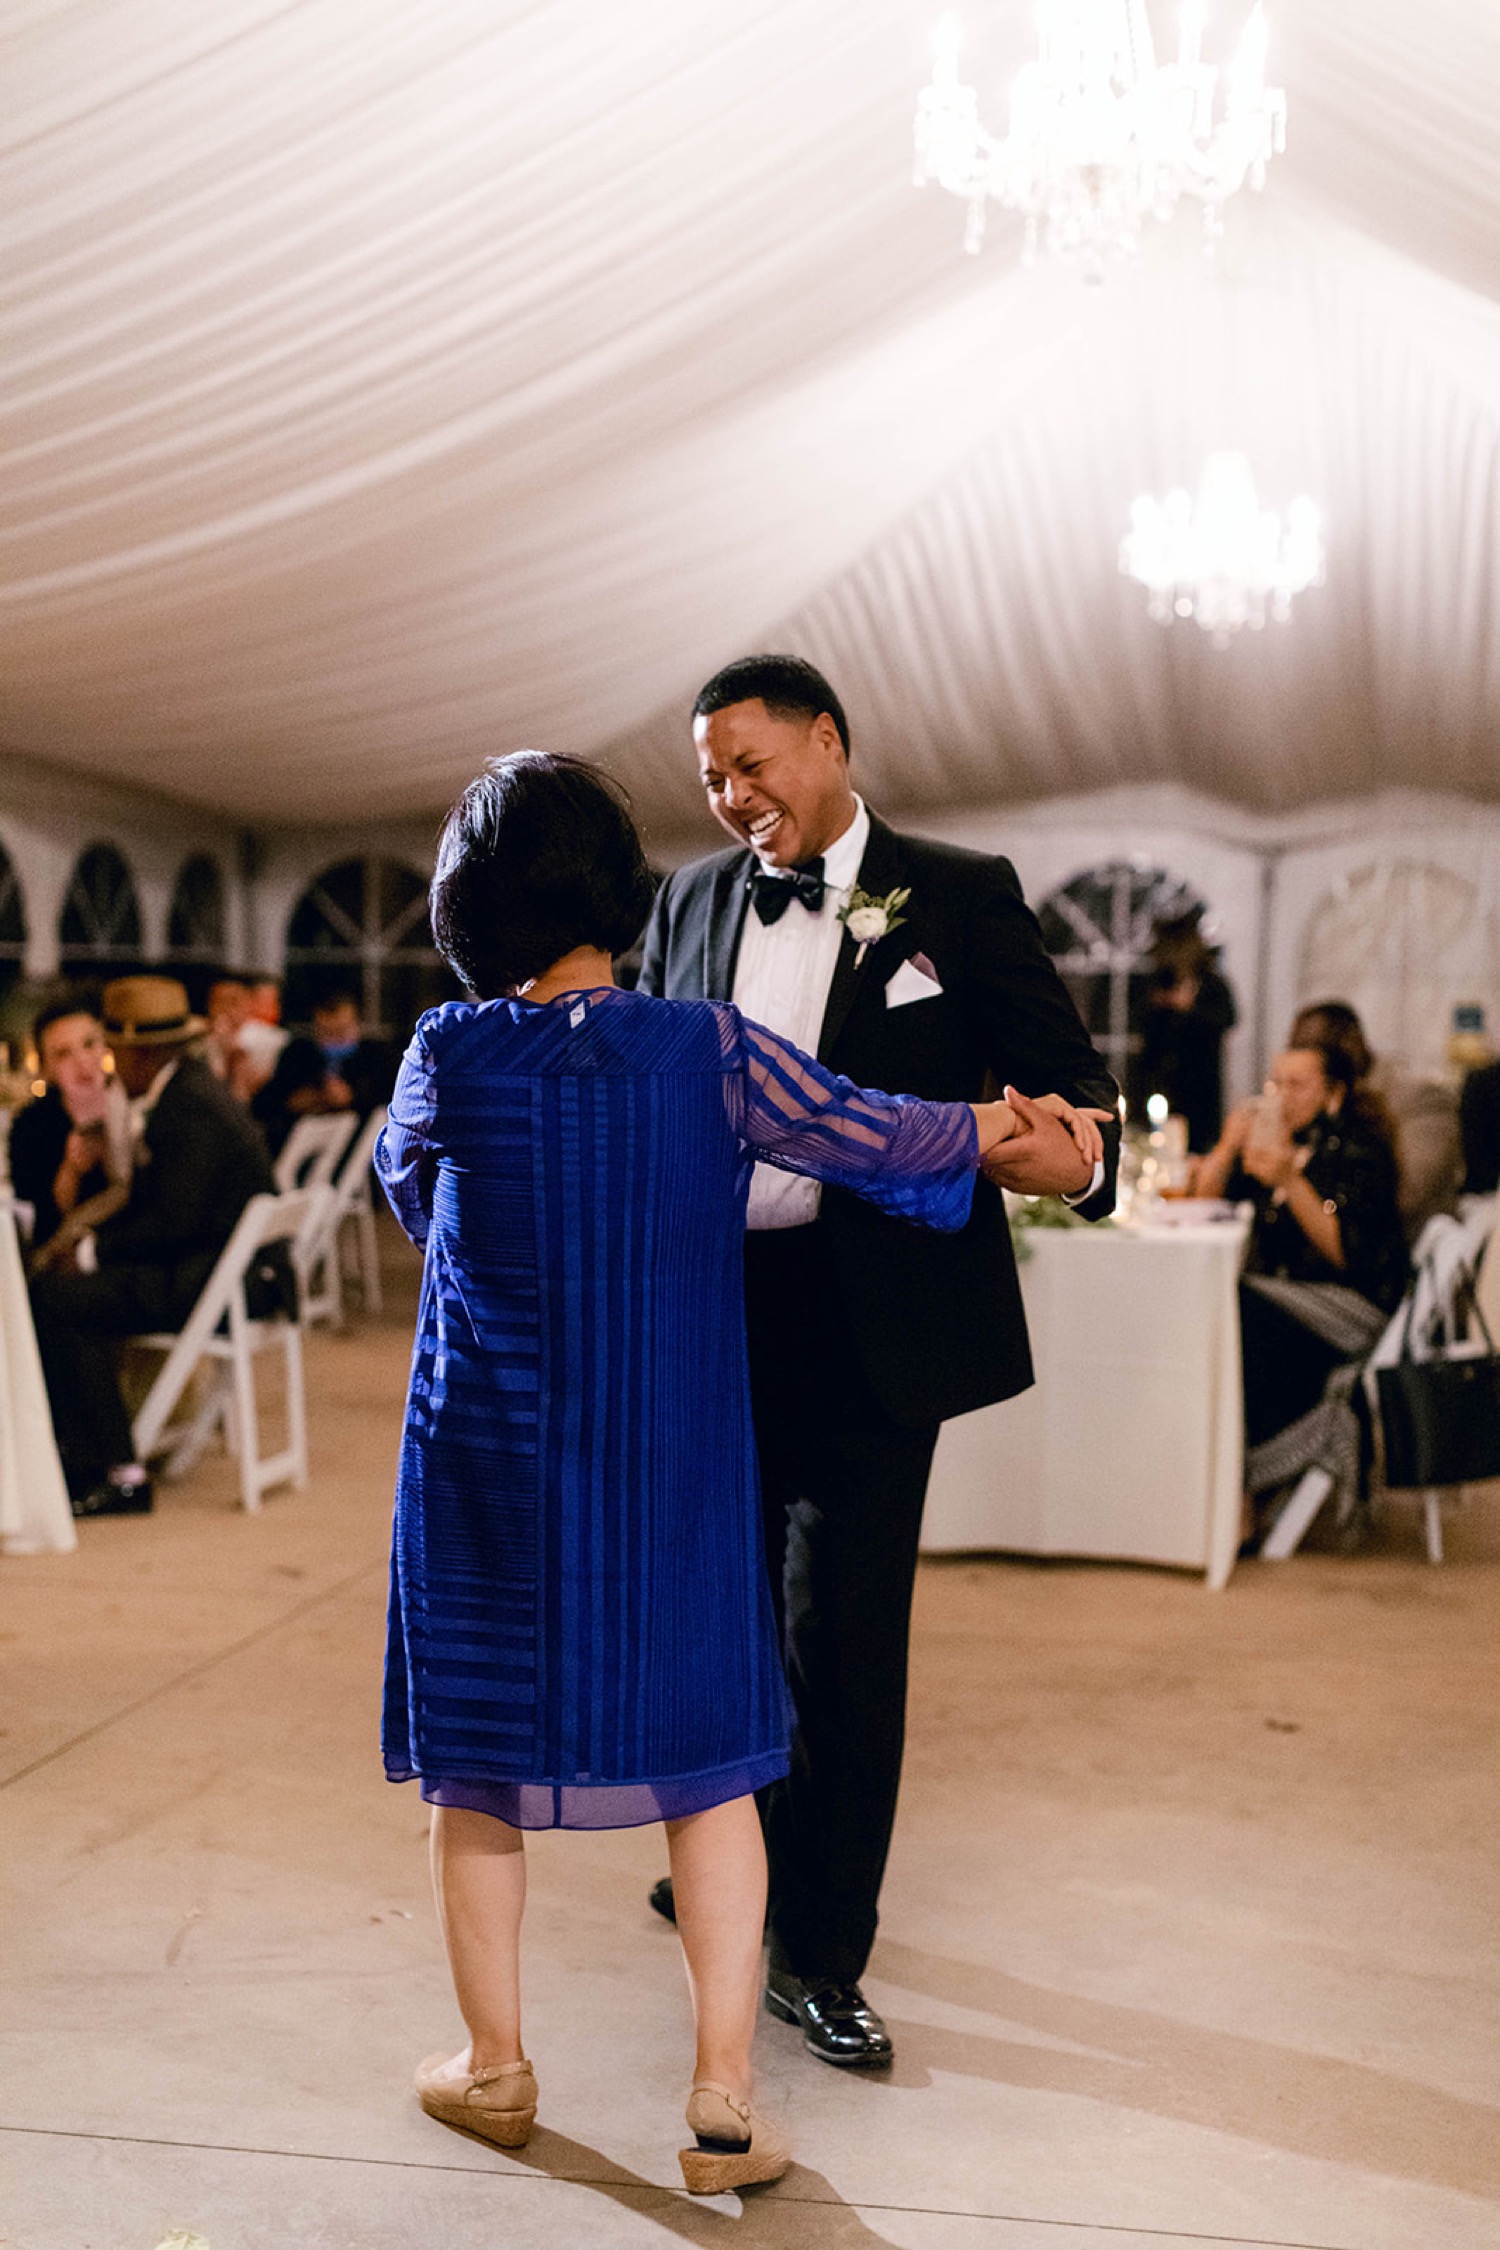 mother and son wedding dance